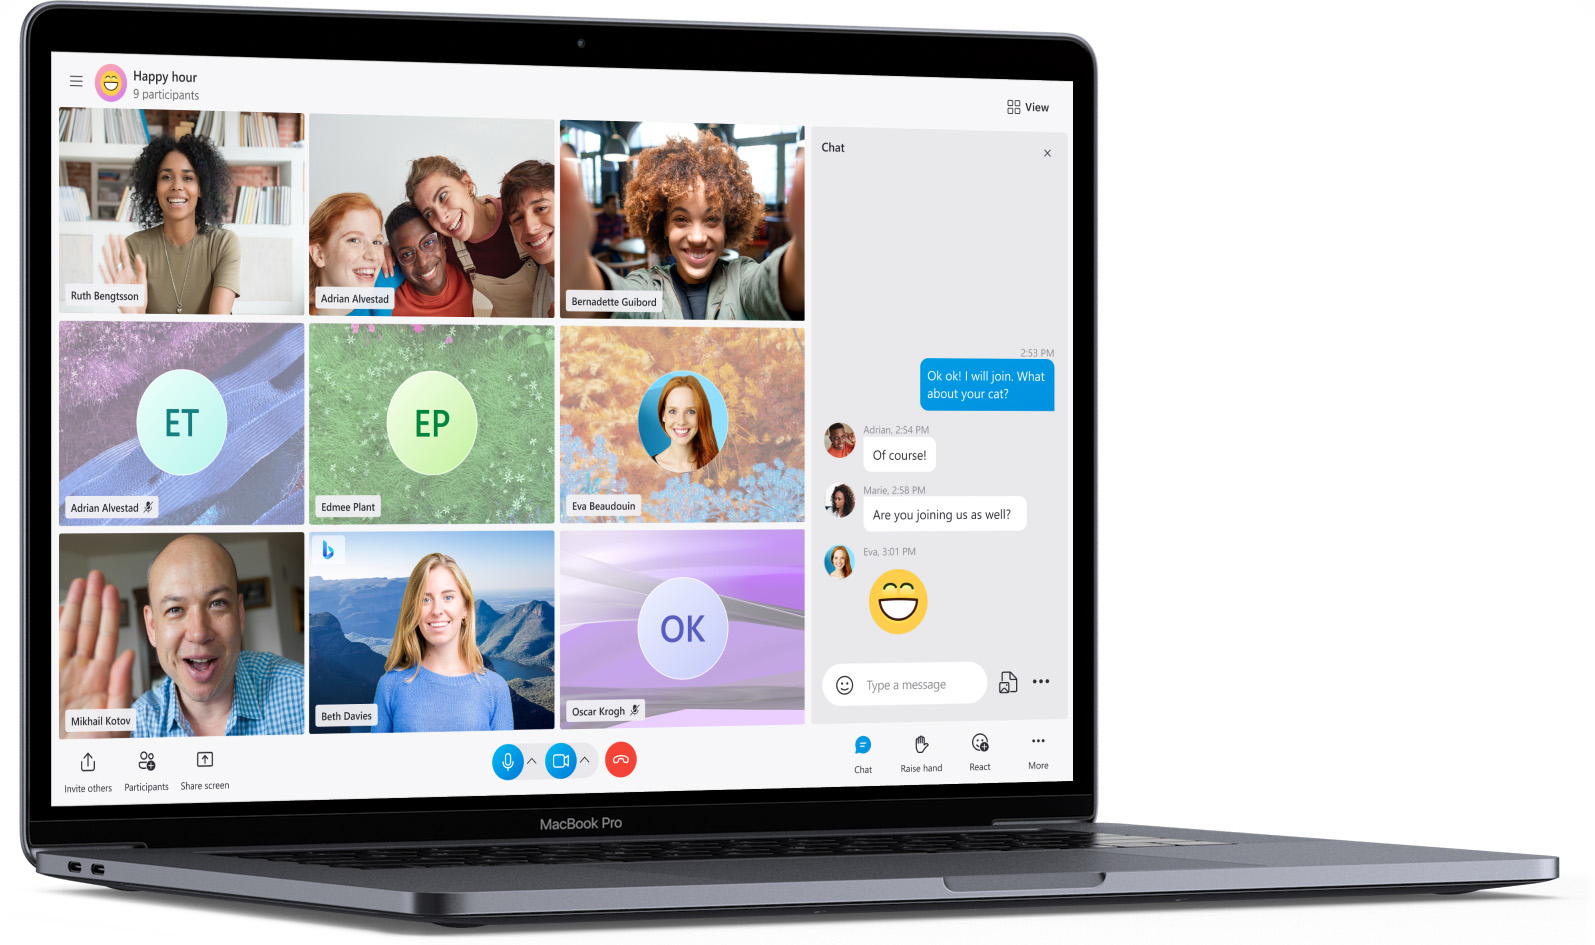 Skype on Apple M1 Mac devices with improved performance and reliability